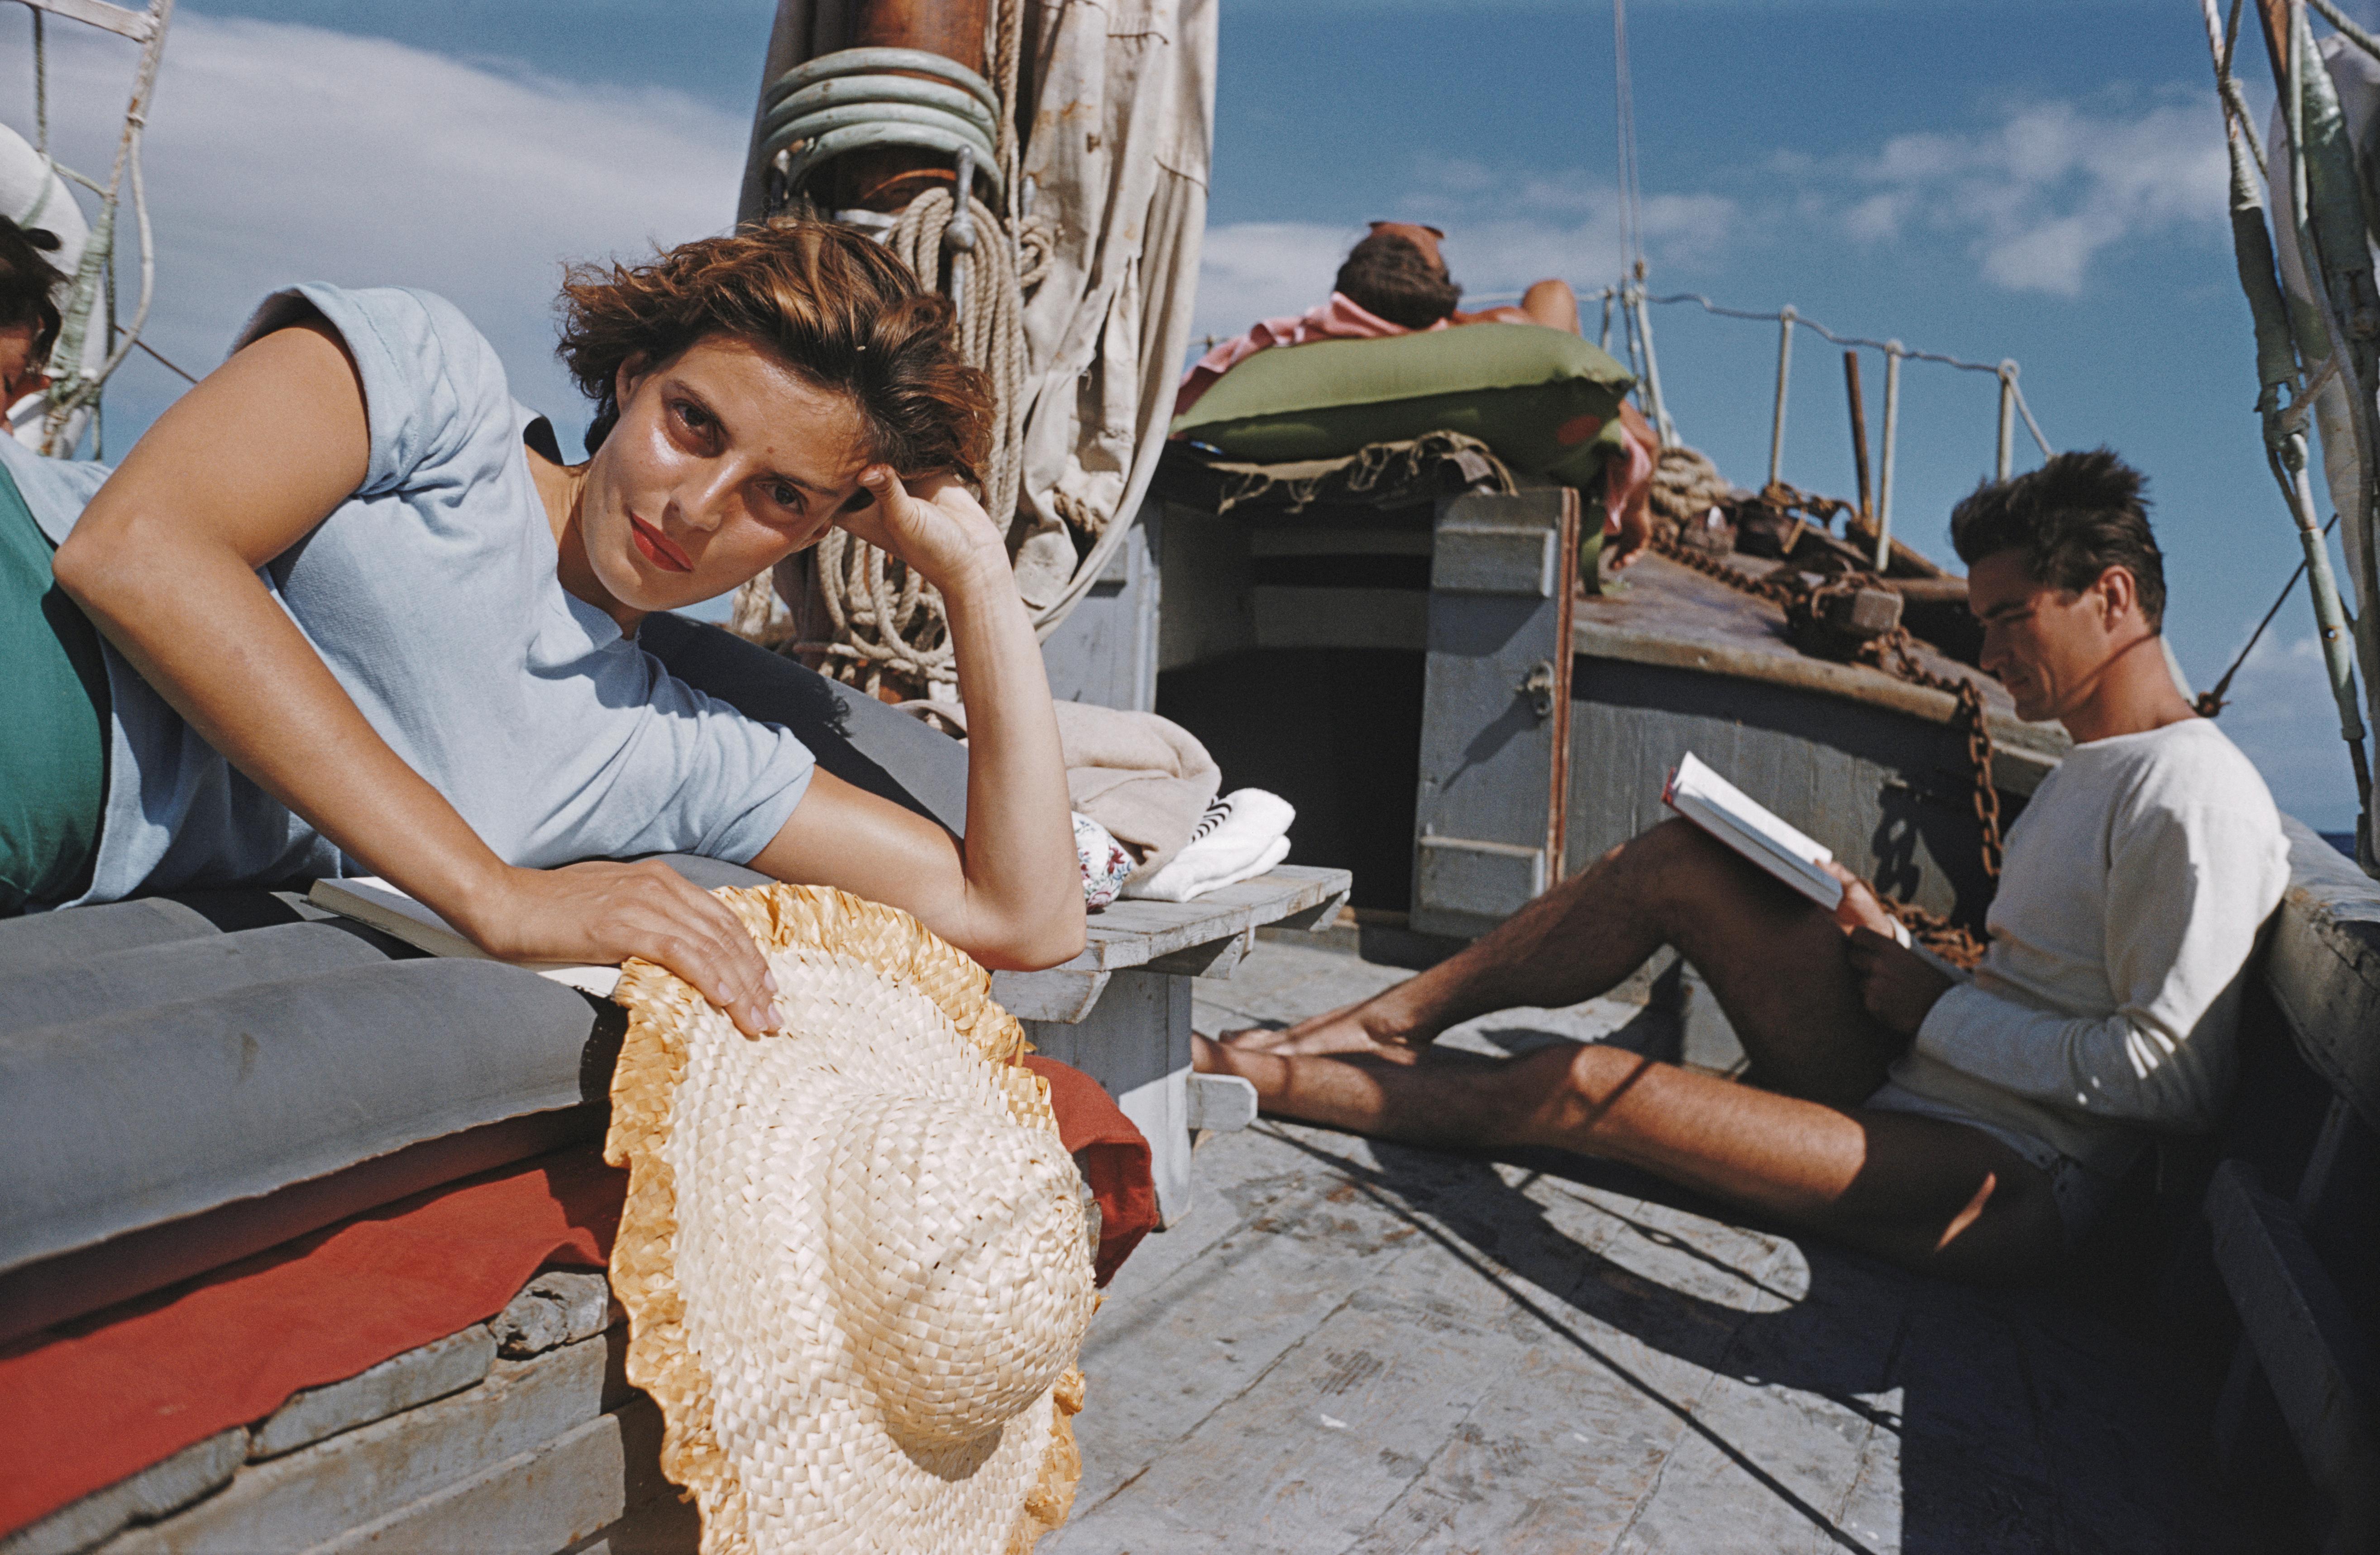 'Capri Cruise' 1958 Slim Aarons Limited Estate Edition Print 

Princess Laudomia Hercolani (in blue) and friends enjoy an on-deck siesta whilst cruising near Capri, July 1958. (Photo by Slim Aarons/Hulton Archive/Getty Images)

Produced from the